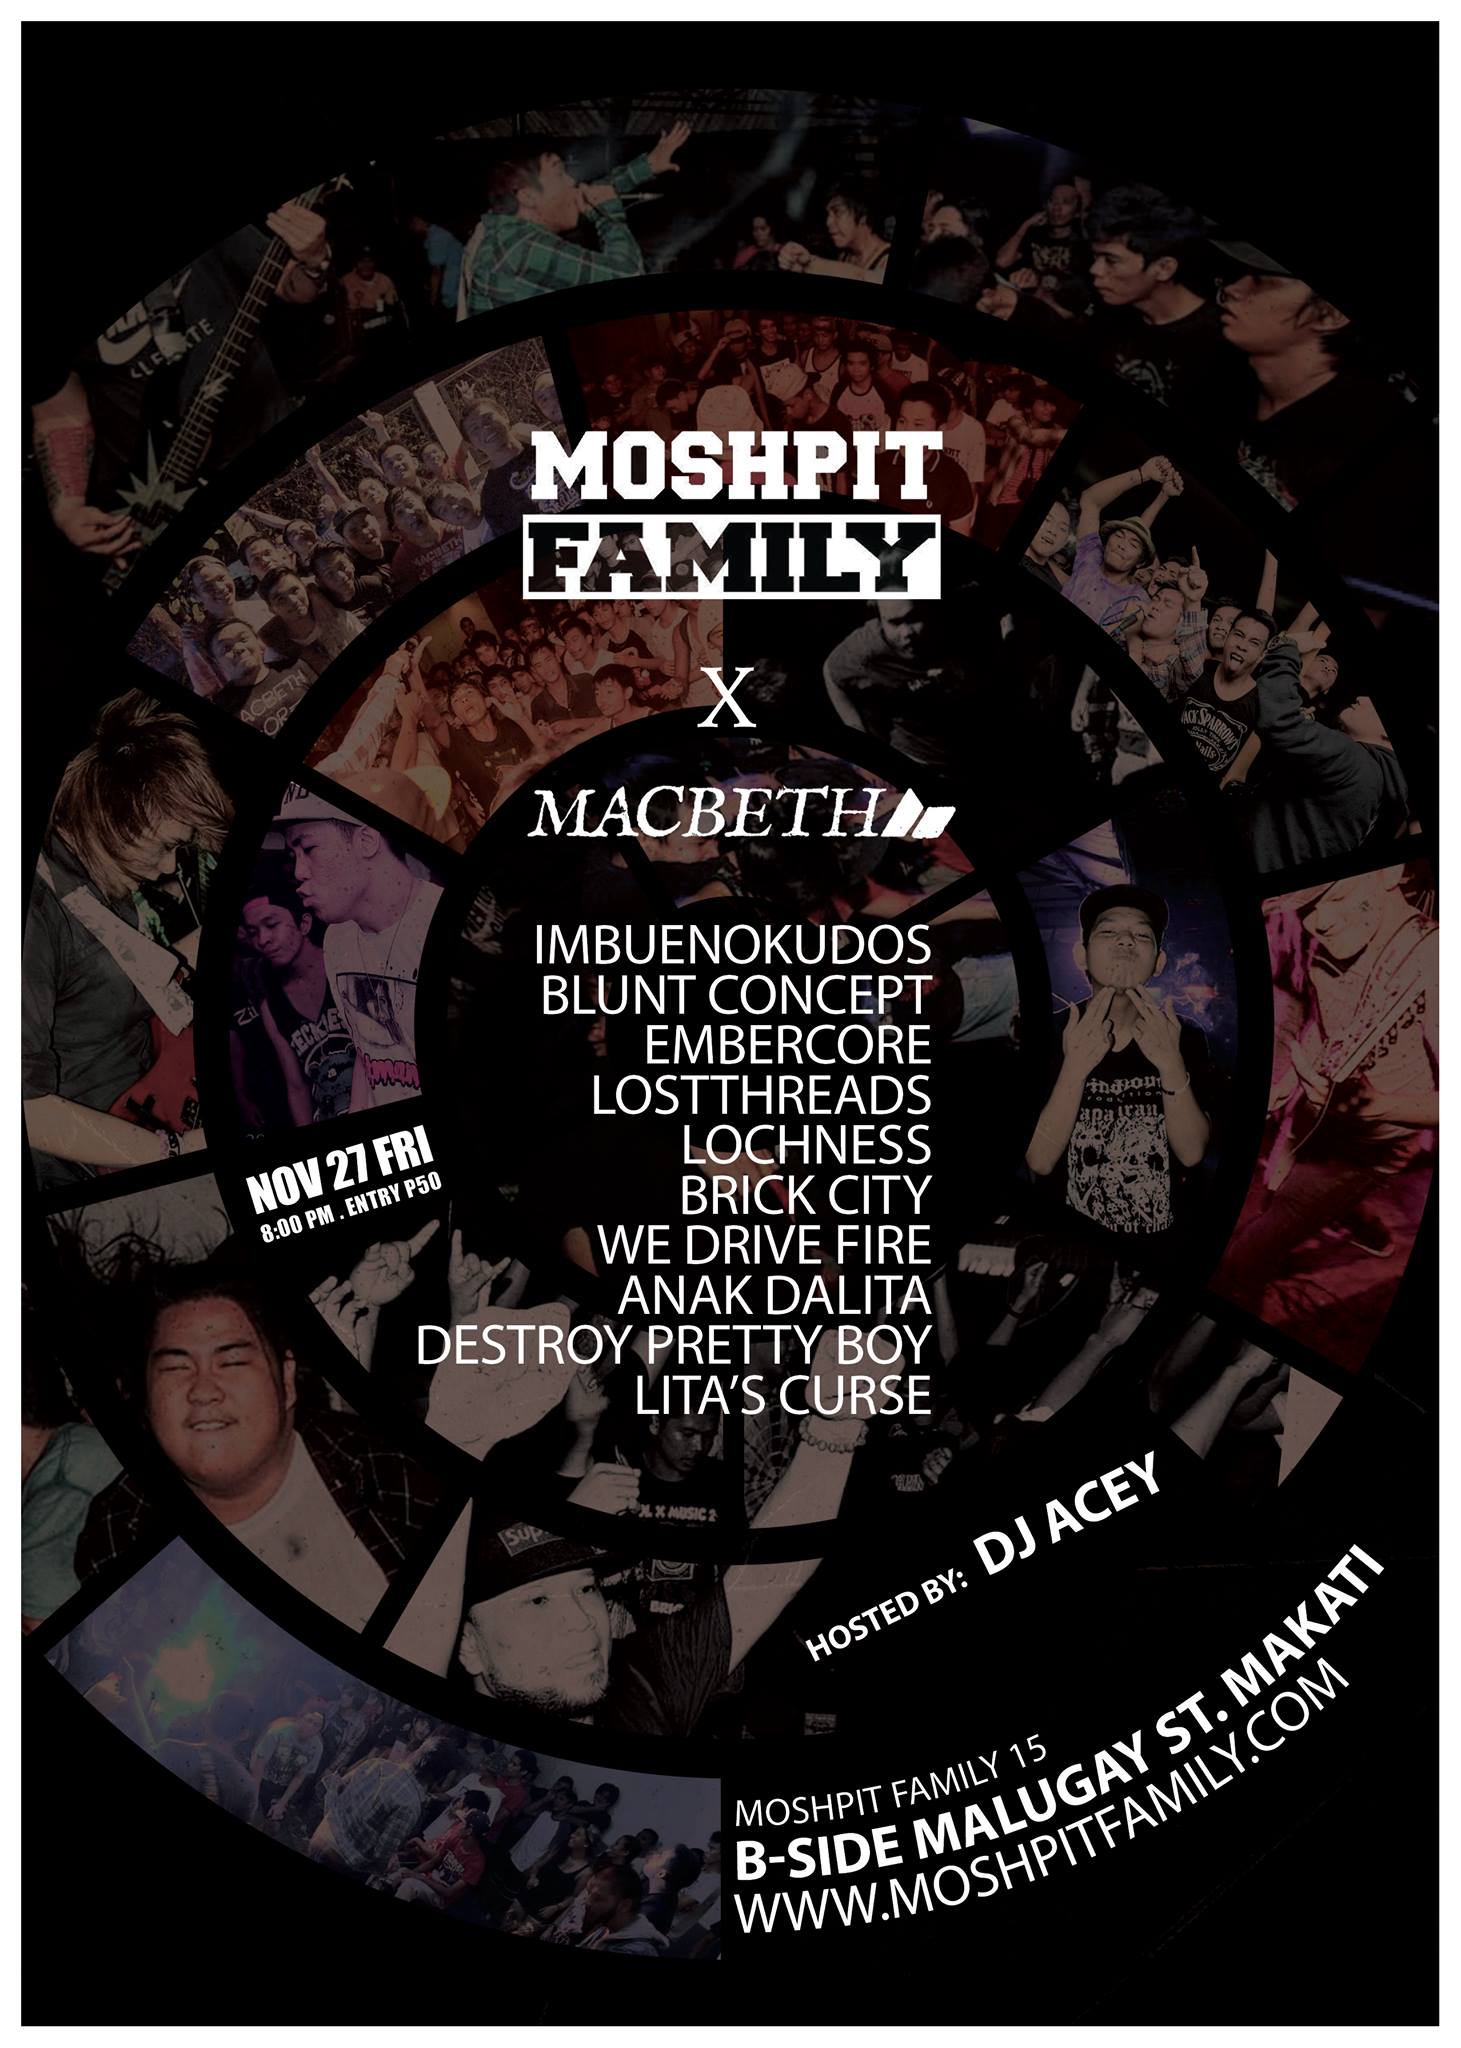 MOSHPIT FAMILY x MACBETH clock Friday, November 27 at 8:00pm pin Show Map B - SIDE The Collective (7274 Malugay St.), Makati, Philippines MOSHPIT FAMILY x MACBETH Hosted by: DJ ACEY Performances by: IMBUENOKUDOS BRICK CITY BLUNT CONCEPT EMBERCORE LOCHNESS LOSTTHREADS WE DRIVE FIRE ANAK DALITA DESTROY PRETTY BOY LITA'S CURSE MOSH Starts at 8PM ENTRANCE: P50 MF MEMBERS (FREE)